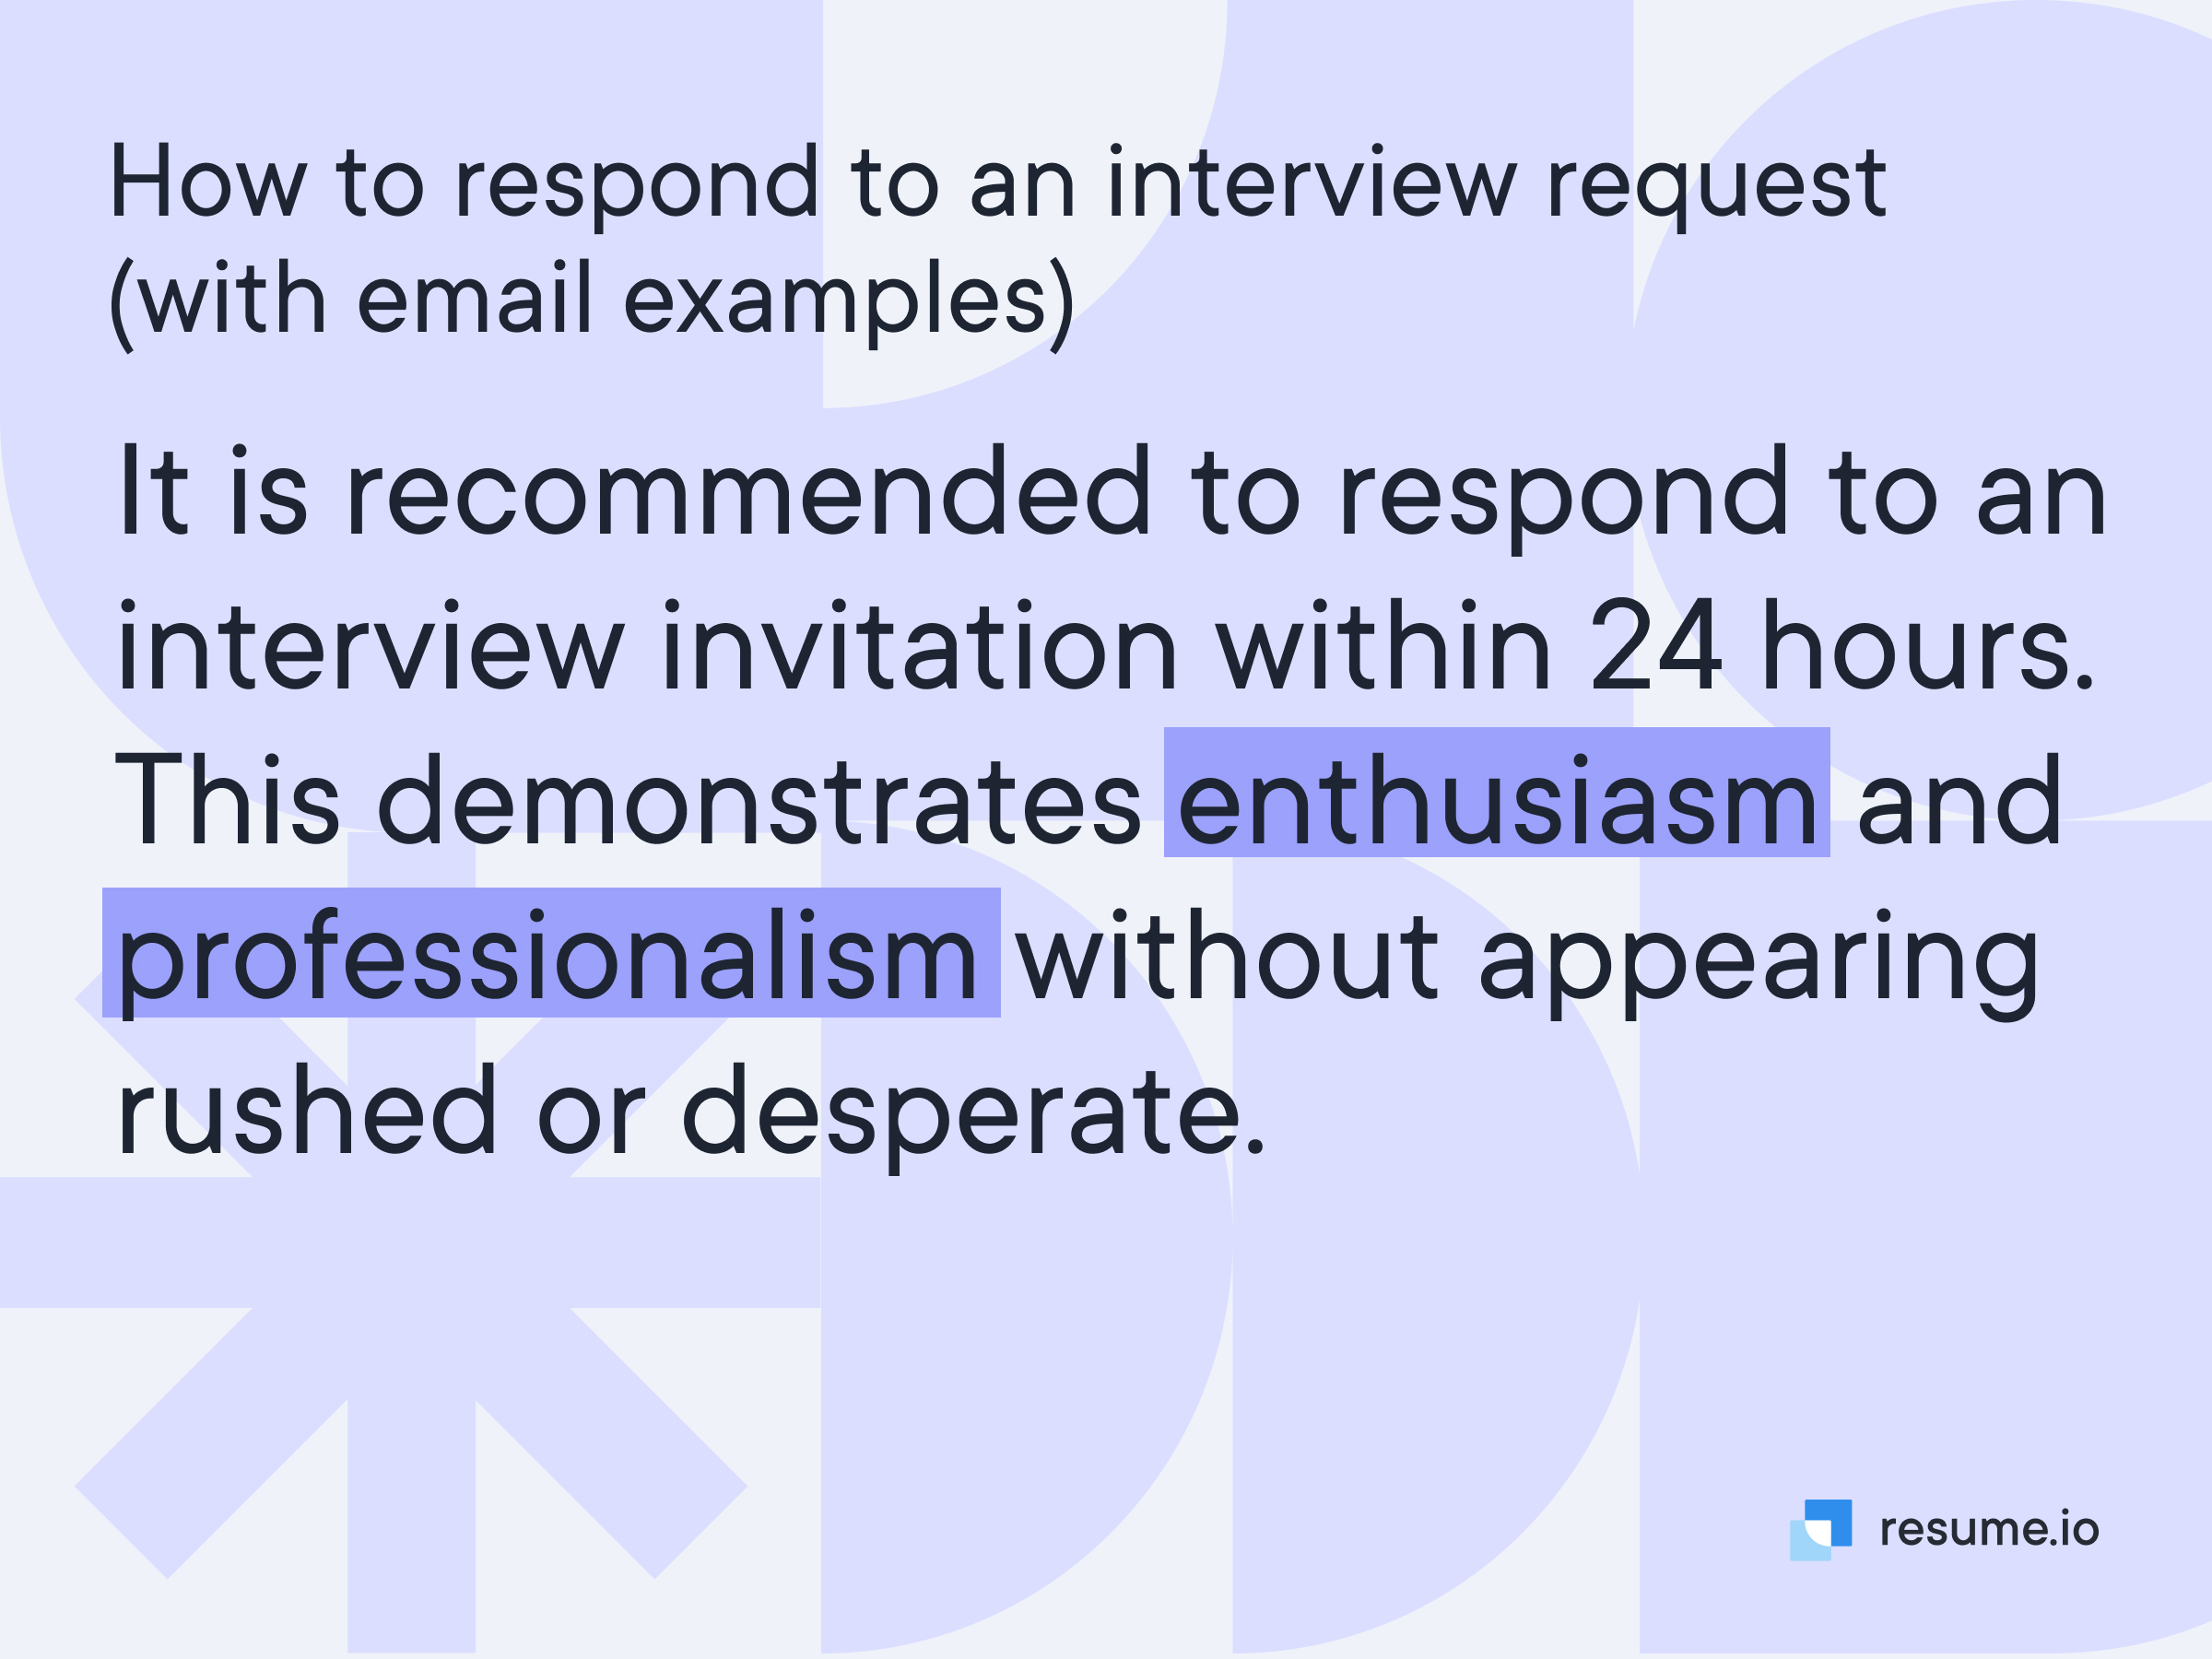 A fast response demonstrates enthusiasm and professionalism